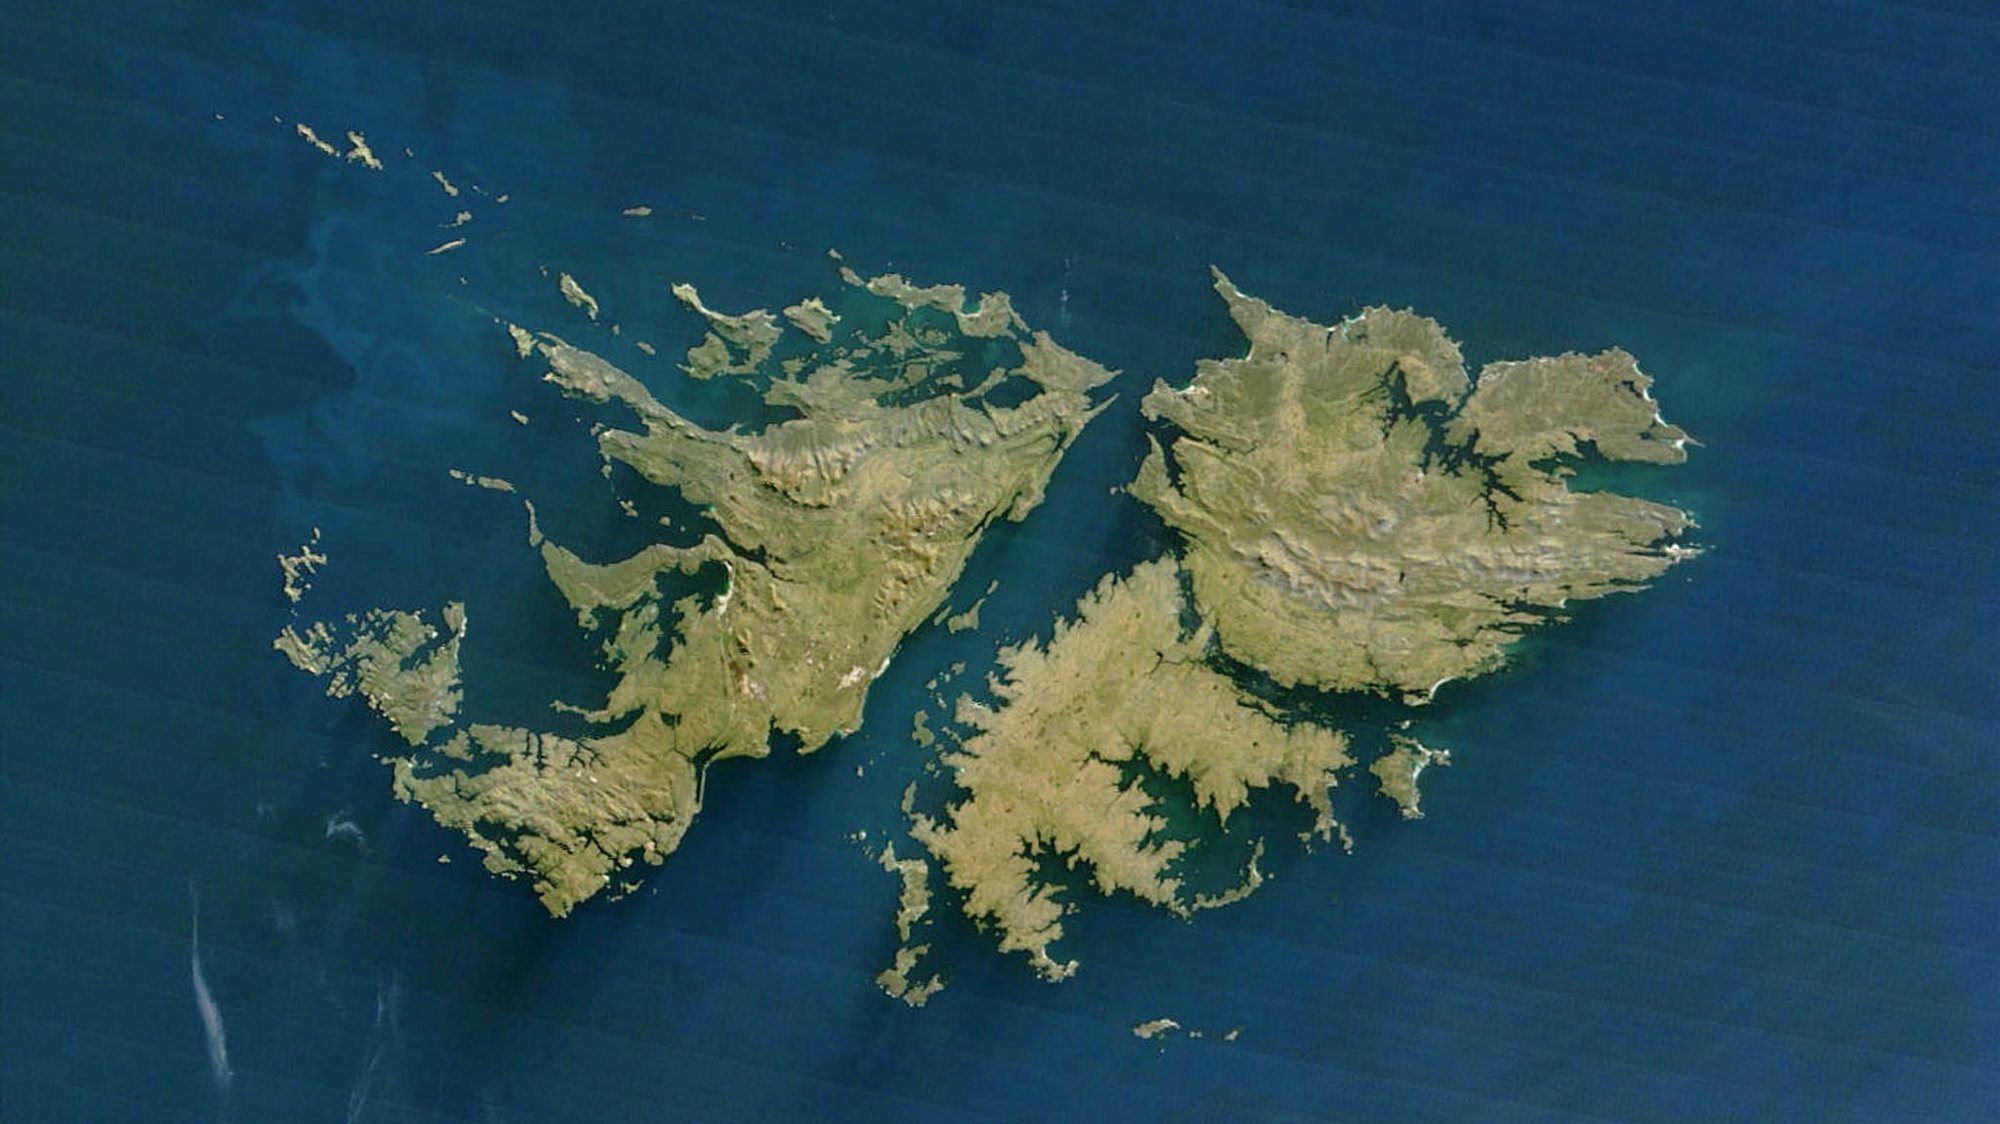 This NASA Terra satellite released 14 July, 2003 shows the Falkland Islands.The Falklands are a small group of islands 480 kilometers (about 300 miles) east of the Strait of Magellan (the straight crossing the southern point of South America). The two main islands are East Falkland and West Falkland, though some 200 small islands are also part of this British-administered colony. The islands are rocky, wet, and windswept, but are ideally suited for sheep-raising. The waters surrounding the islands are home to great whale and seal populations, and were hunted heavily in the not-too-distant past. Fish are also abundant, and besides sheep, the fishing trade is one of the mainstays of this distant island&#039;s economy. AFP PHOTO/NASA